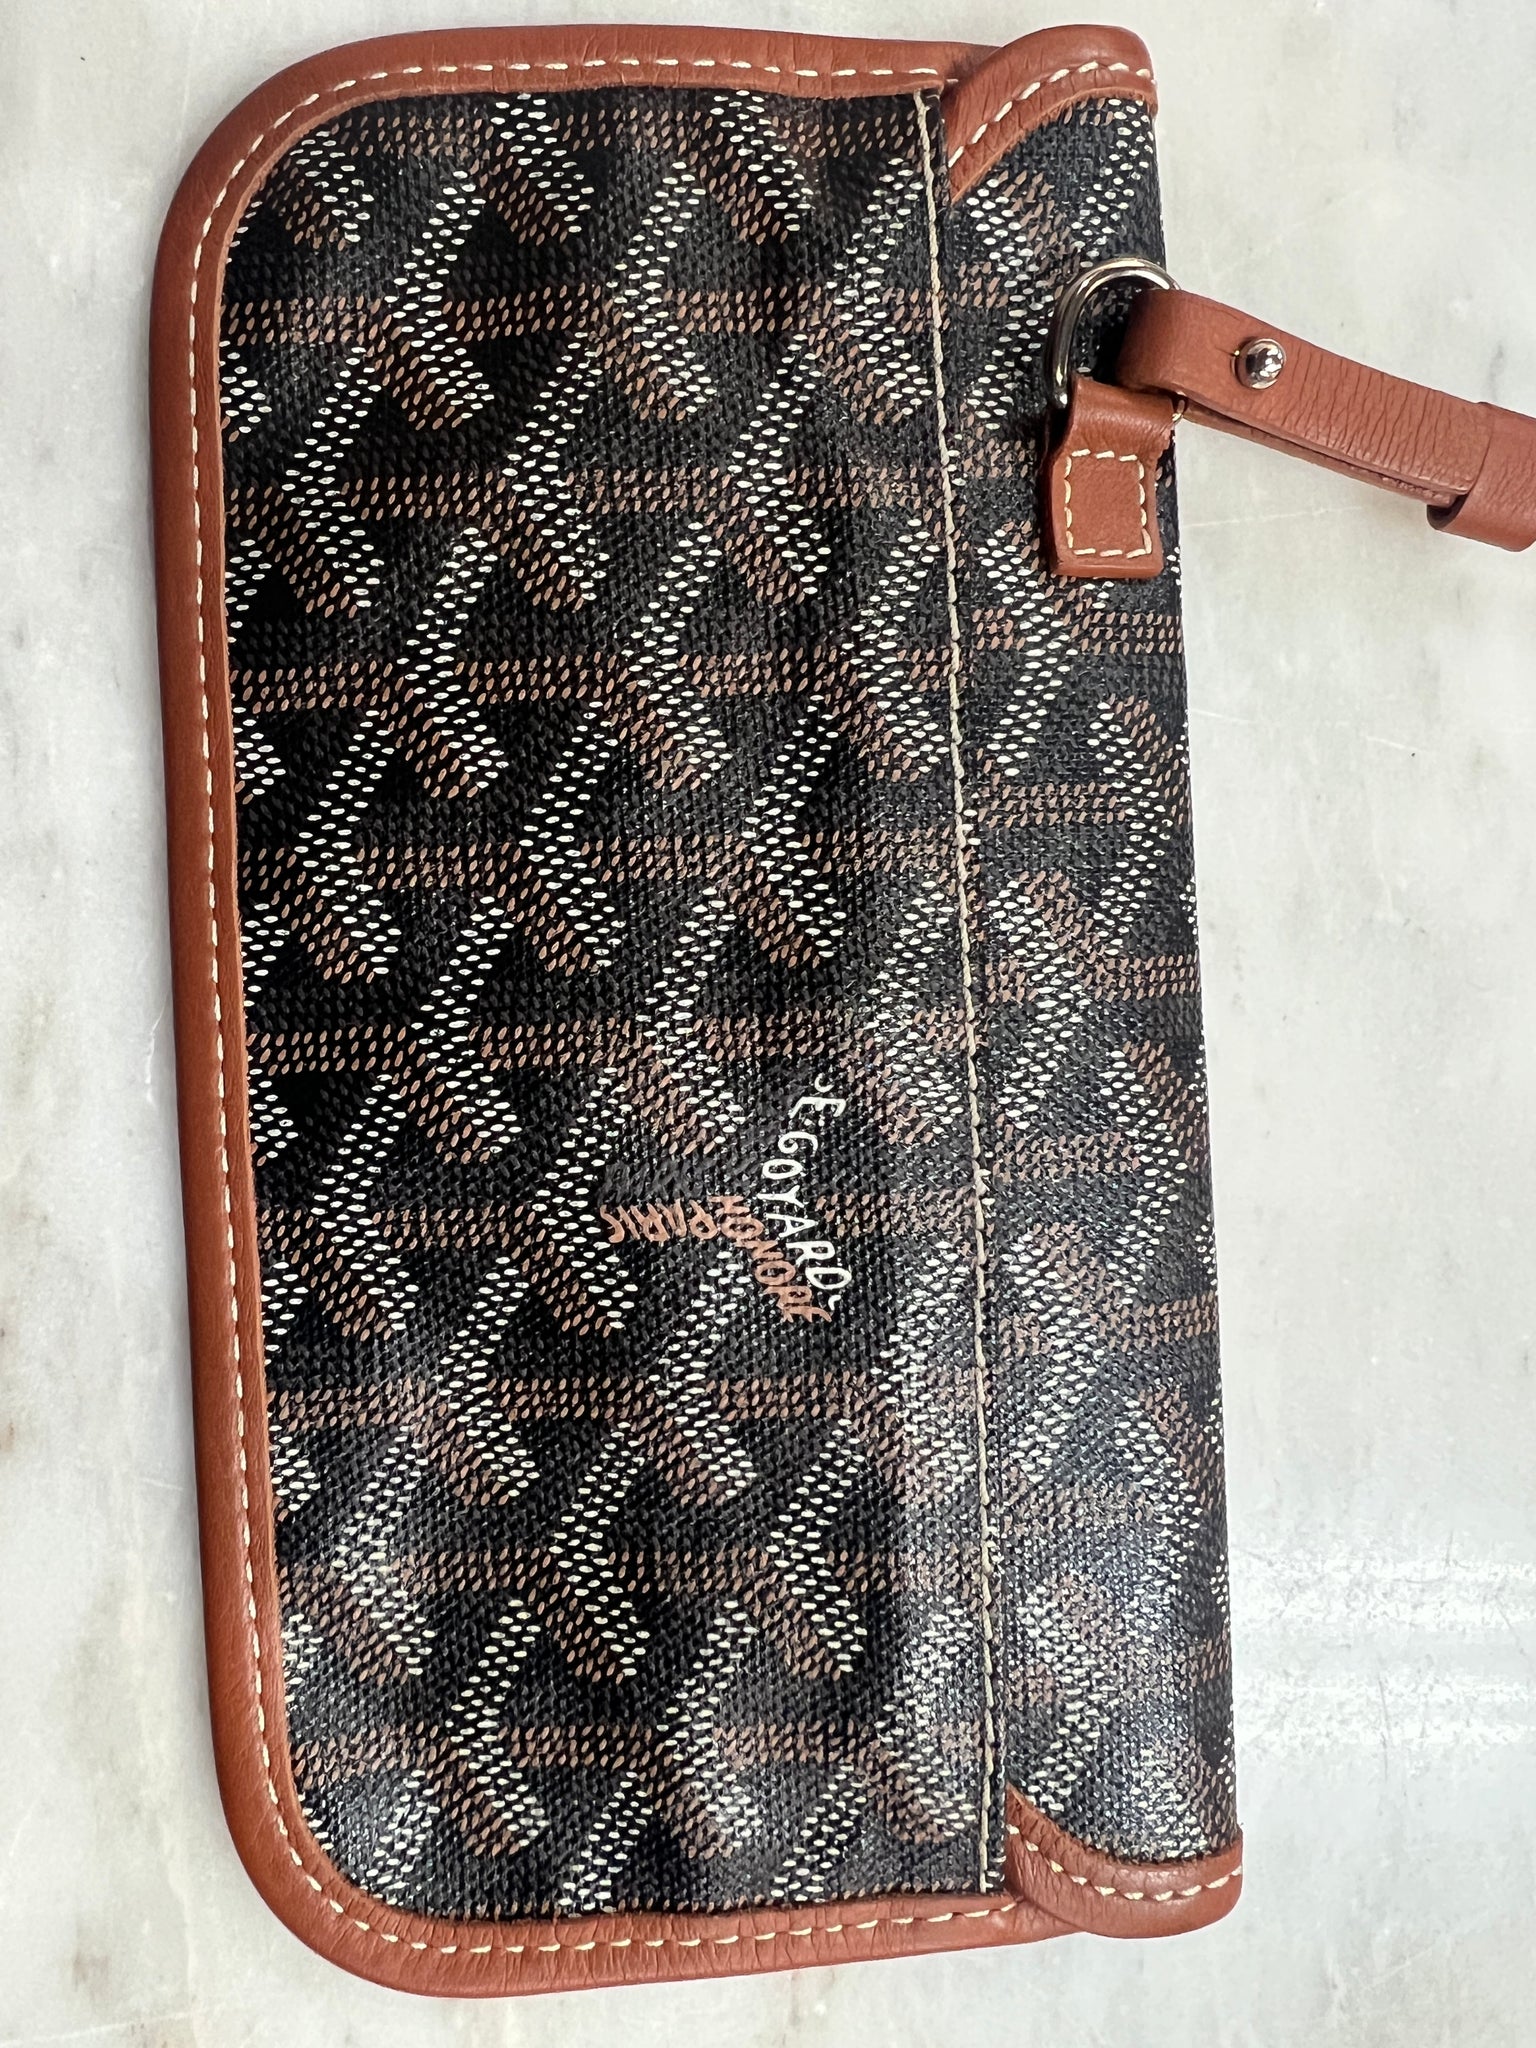 GoYARD Jewelry Box parish made in France black, gray wood and brown leather